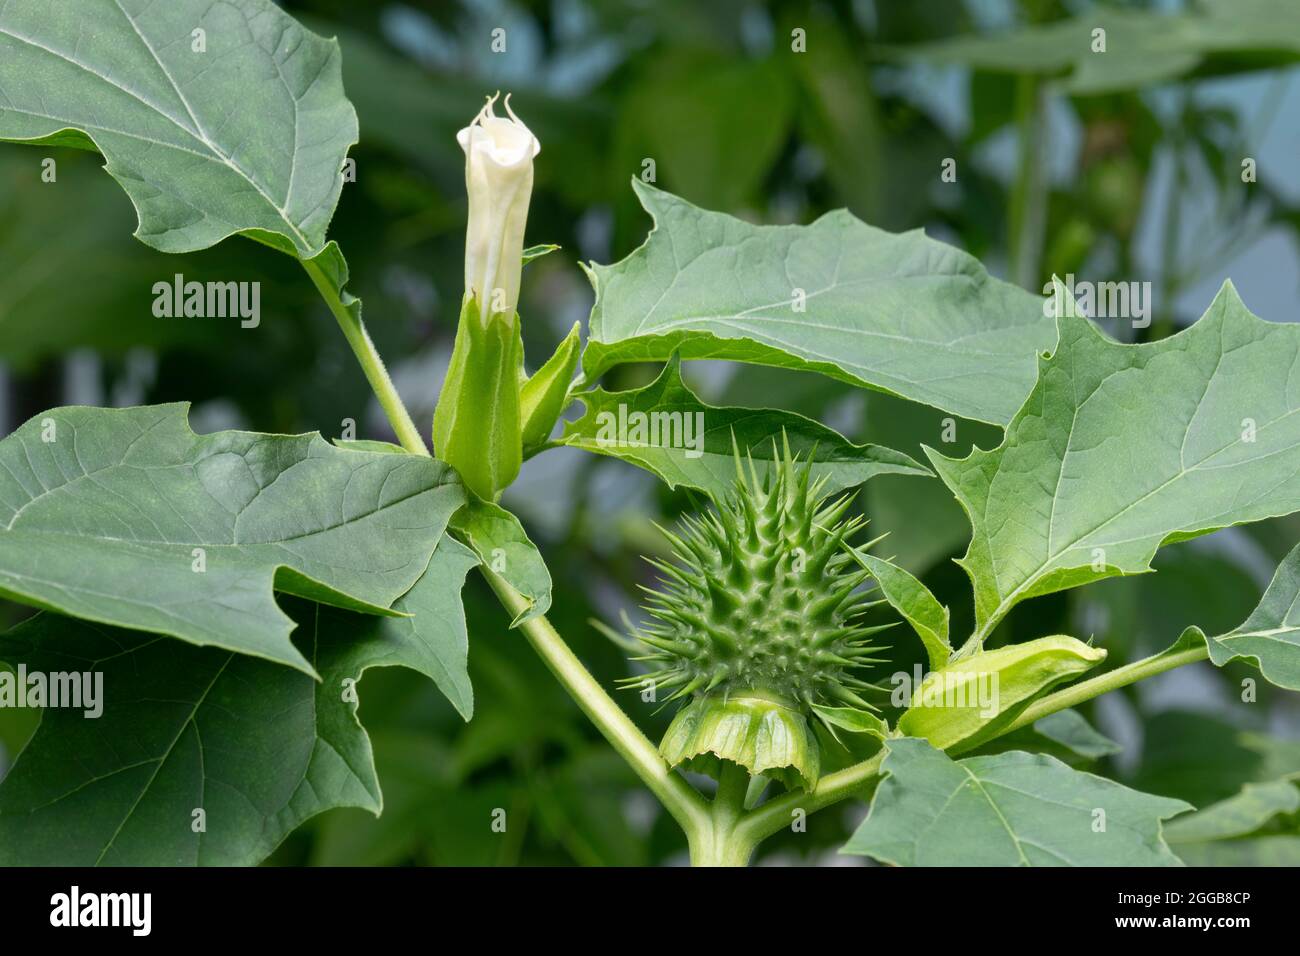 Datura stramonium plant with flower and thorn apple close up outdoor Stock Photo